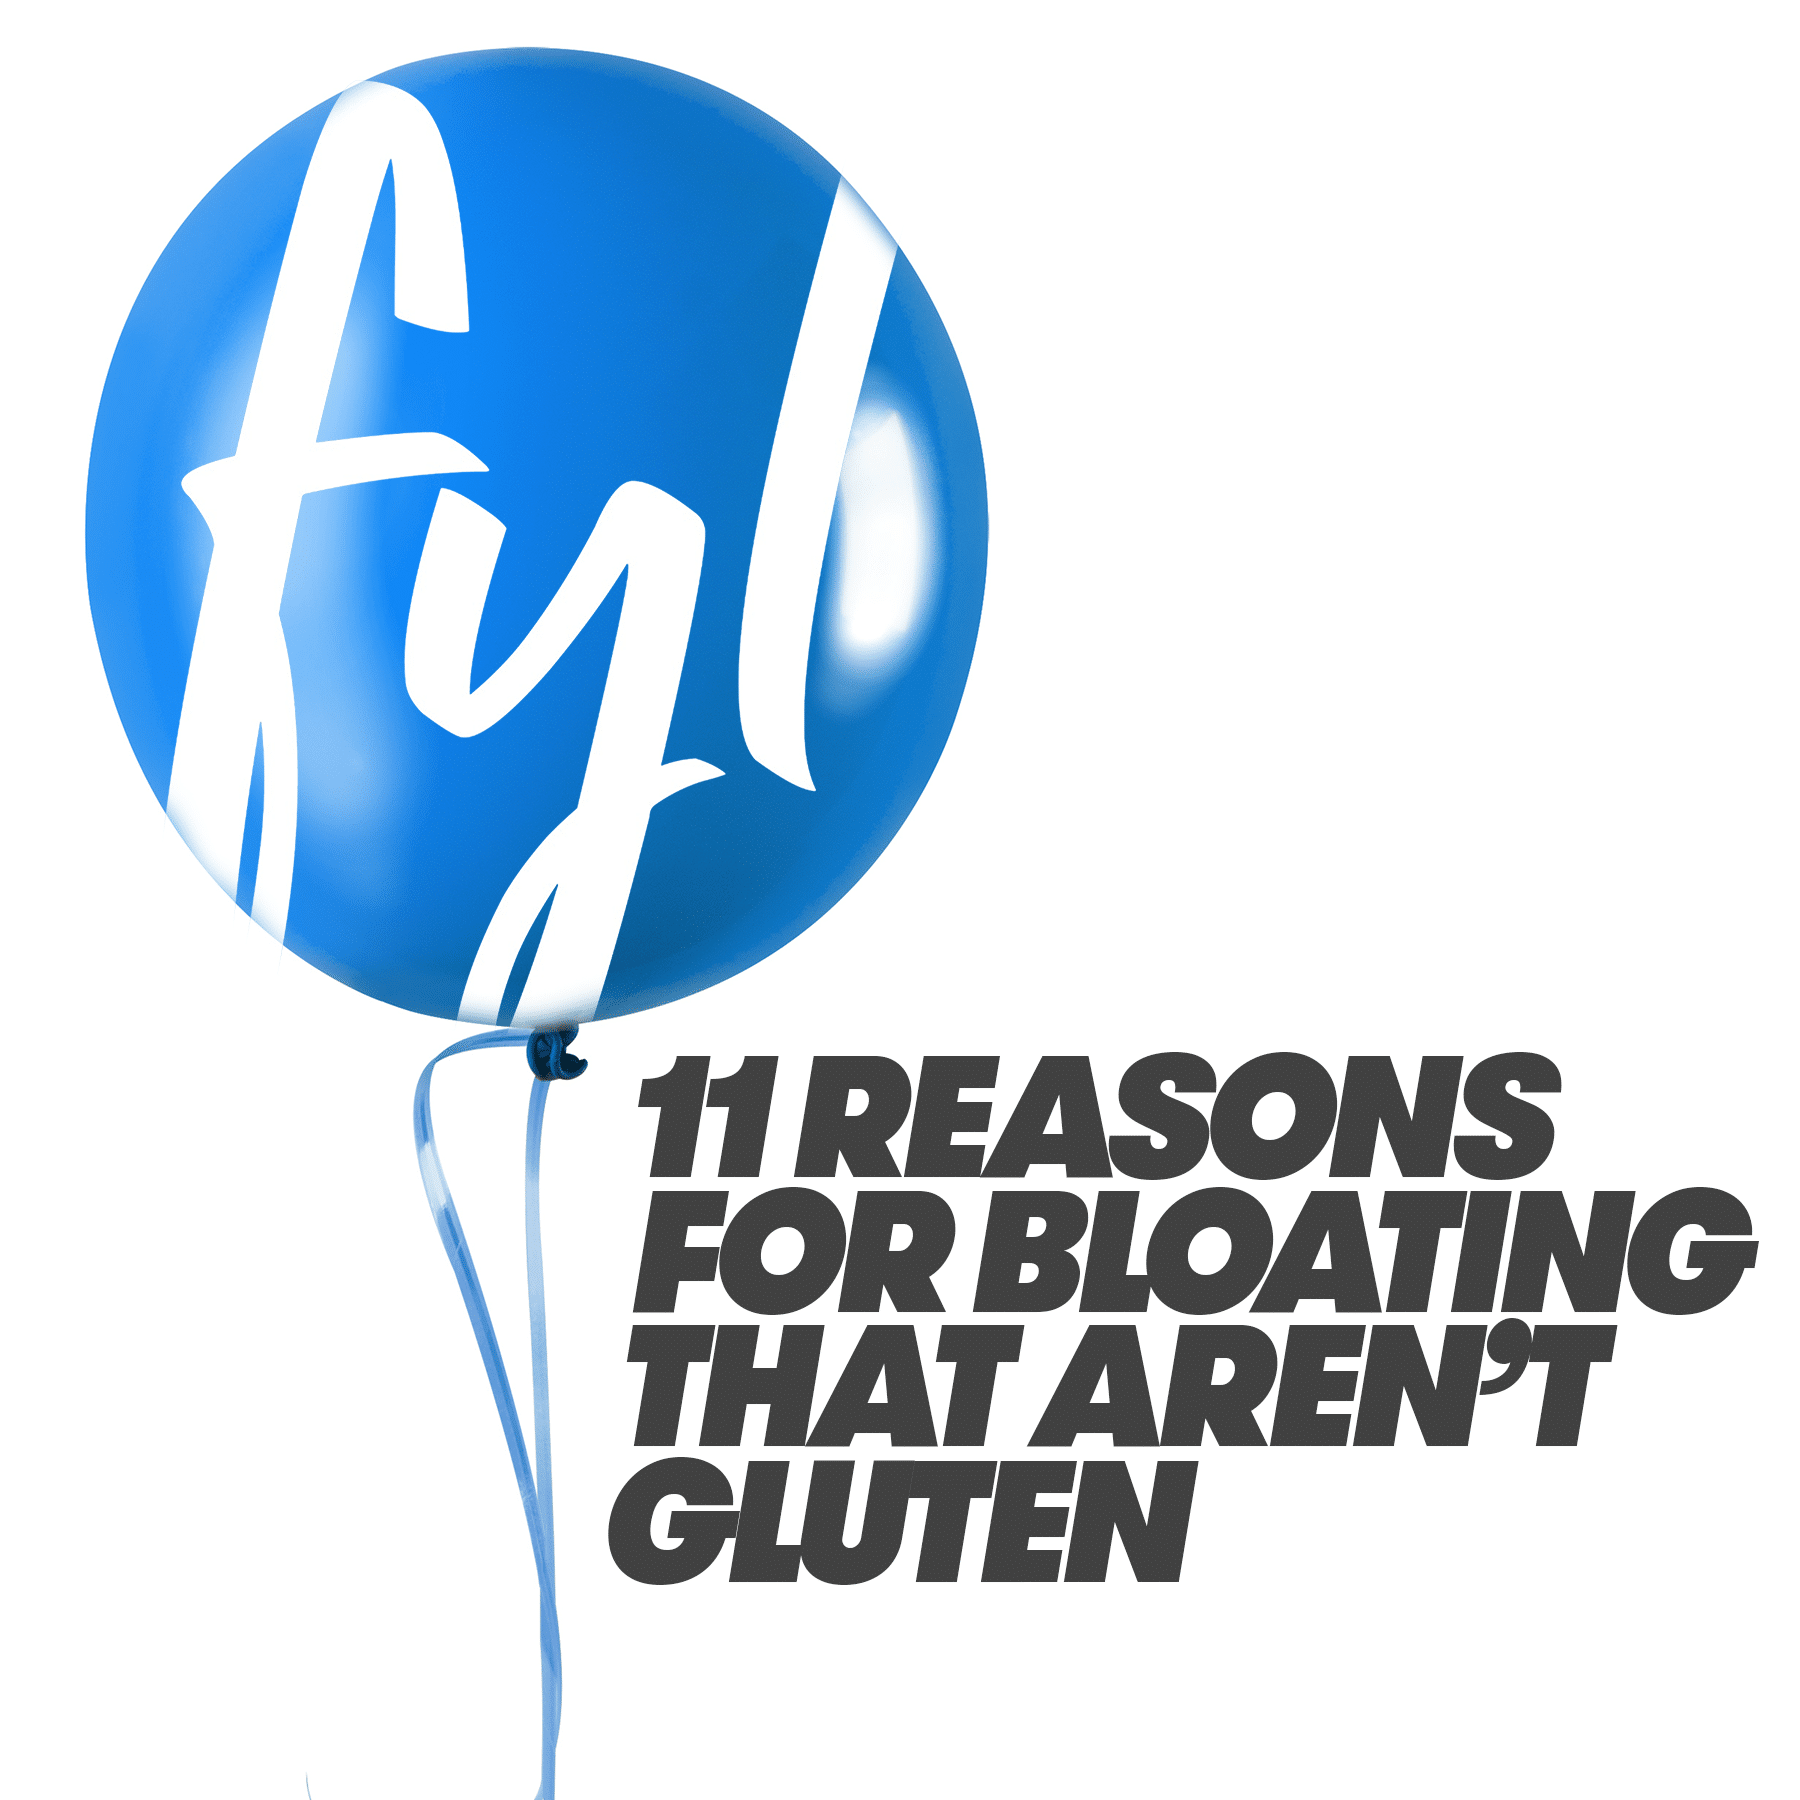 11 Reasons for Bloating That Aren’t Gluten